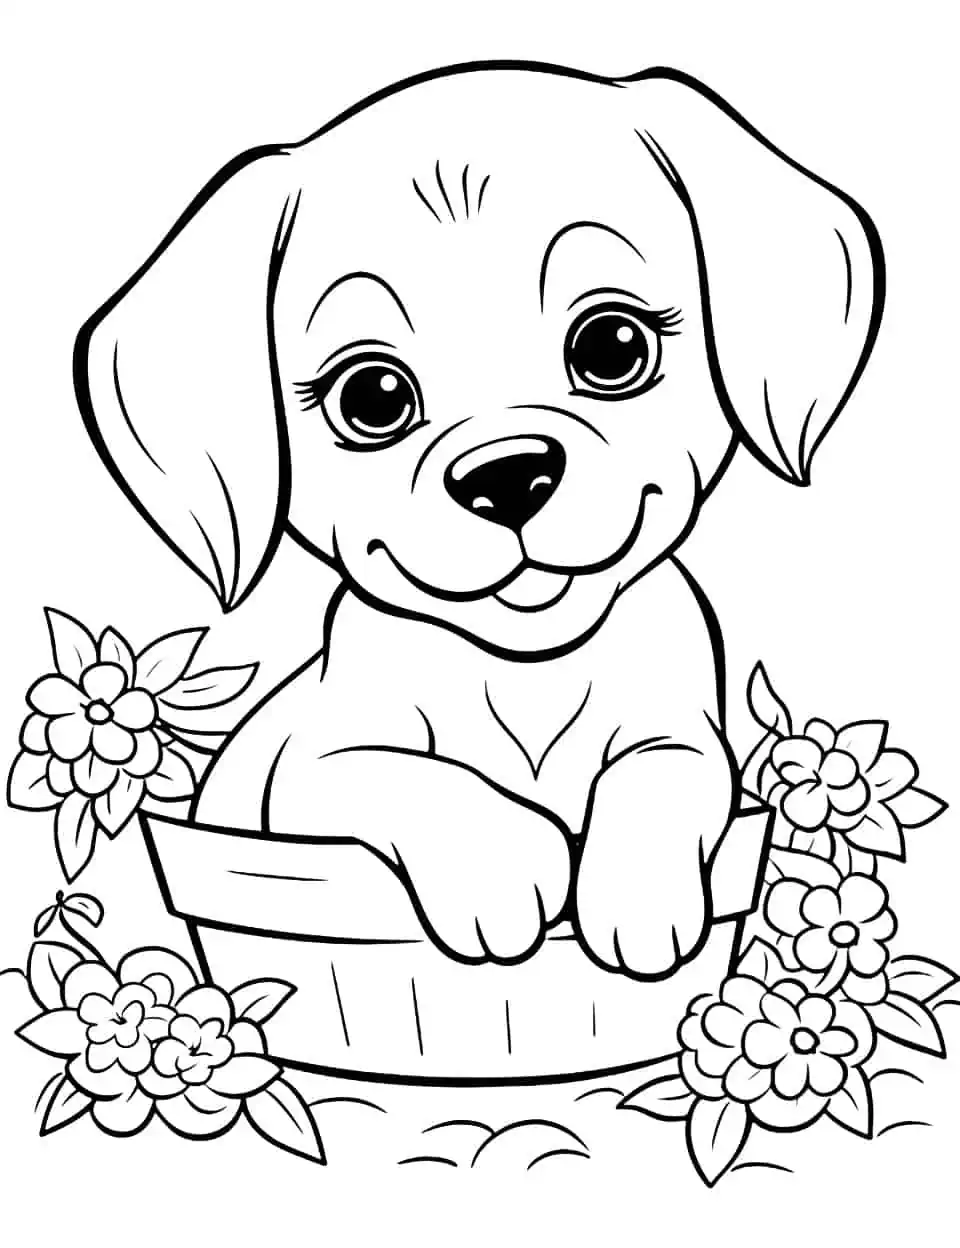 Cute Puppy in a Basket Coloring Page - A tiny, cute puppy sitting inside a basket, surrounded by flowers.